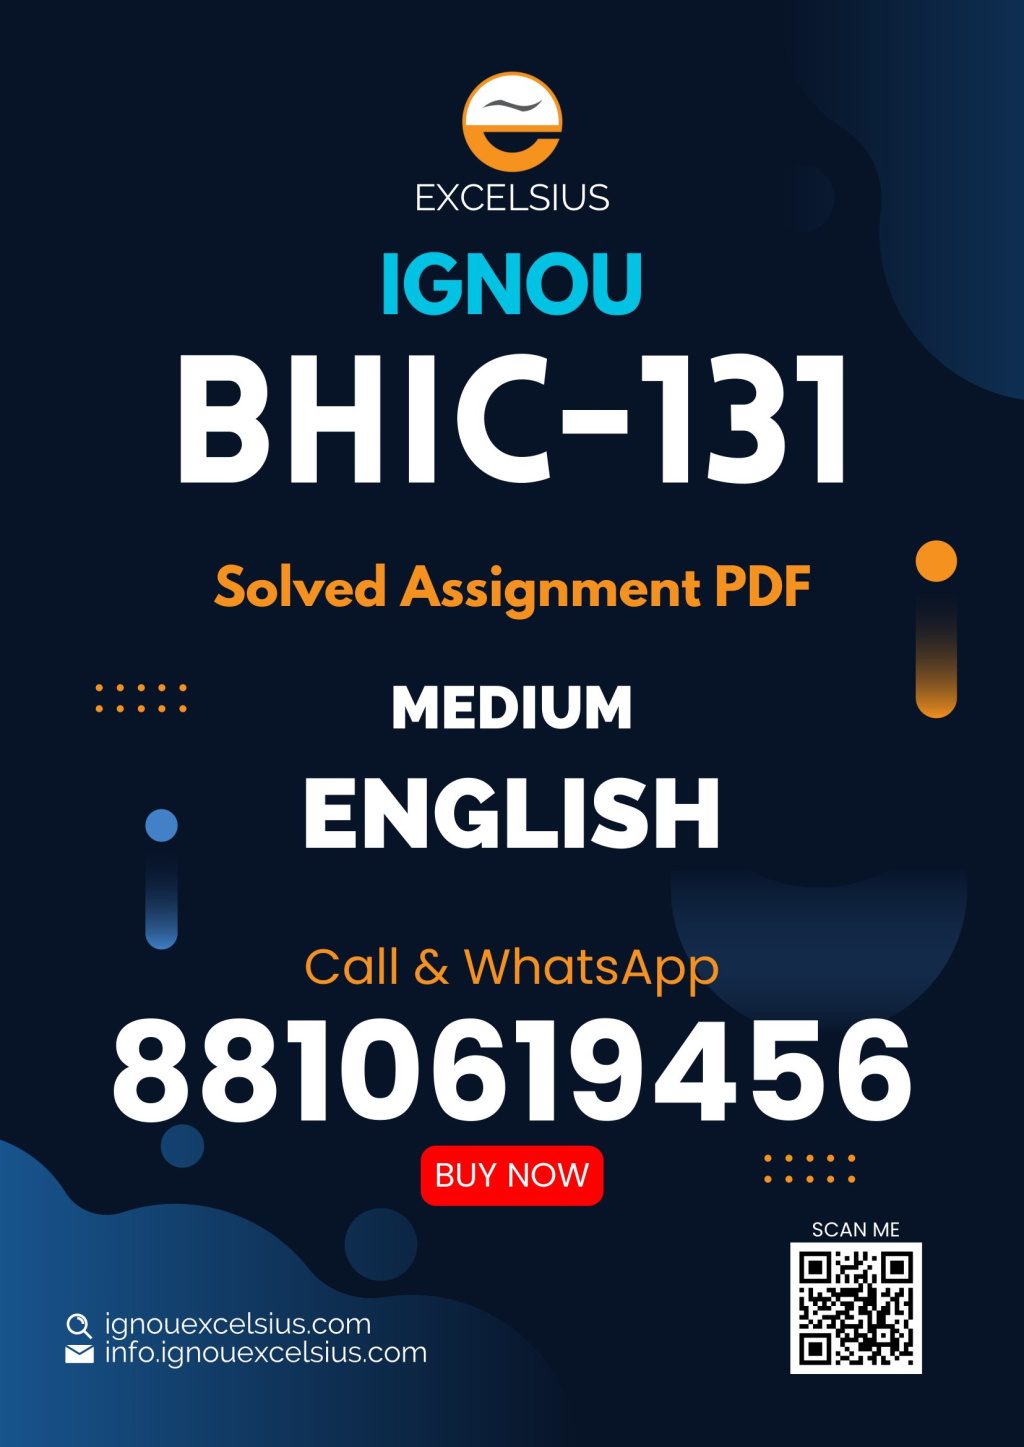 IGNOU BHIC-131 - History of India from the Earliest Times up to 300 CE. Latest Solved Assignment-July 2022 – January 2023